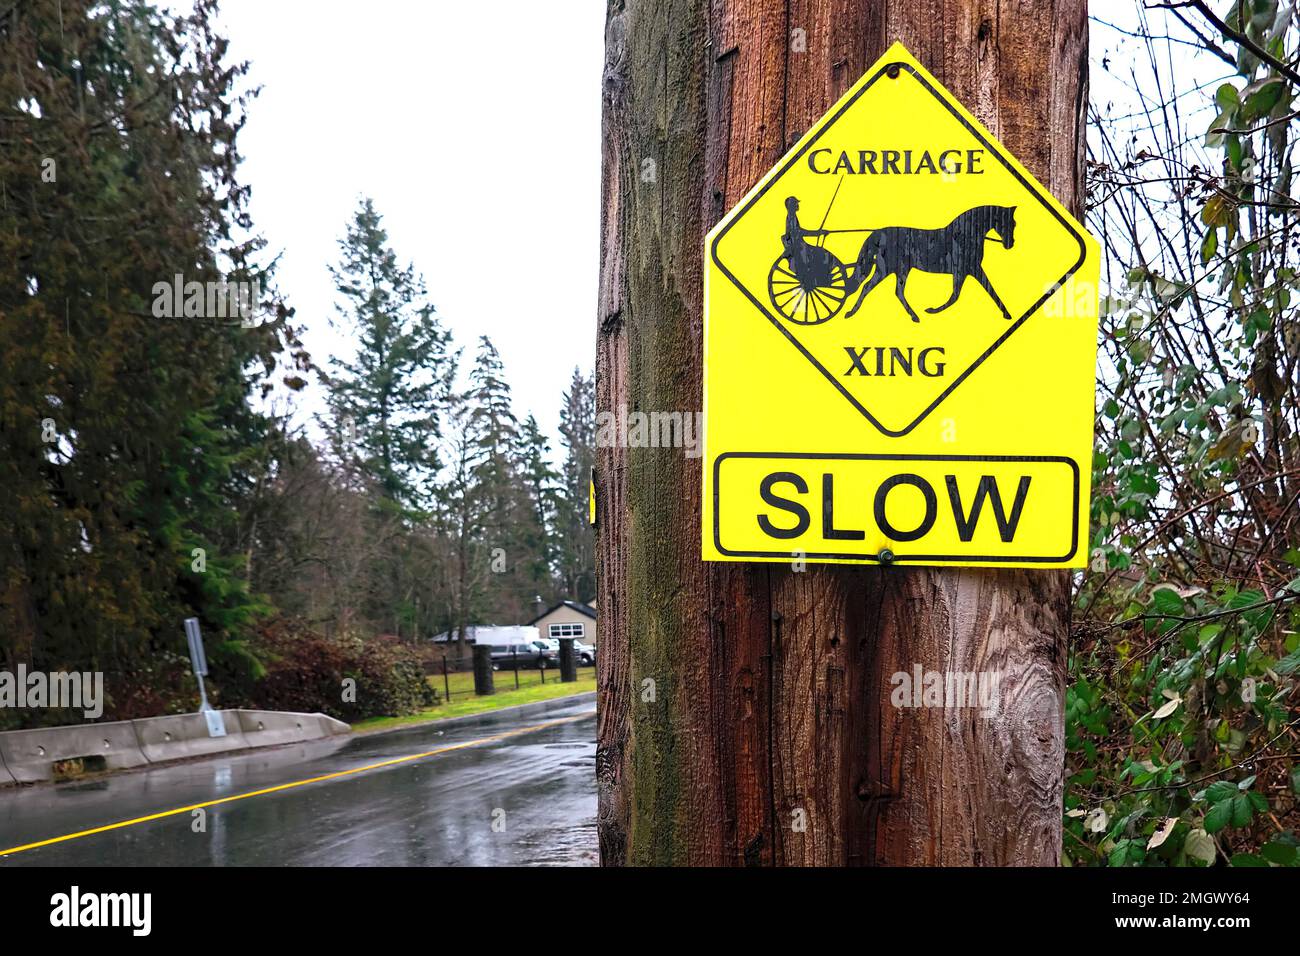 Yellow caution sign -Carriage Xing Slow sign on a utility pole along a rural road in Maple Ridge, B. C., Canada. Stock Photo